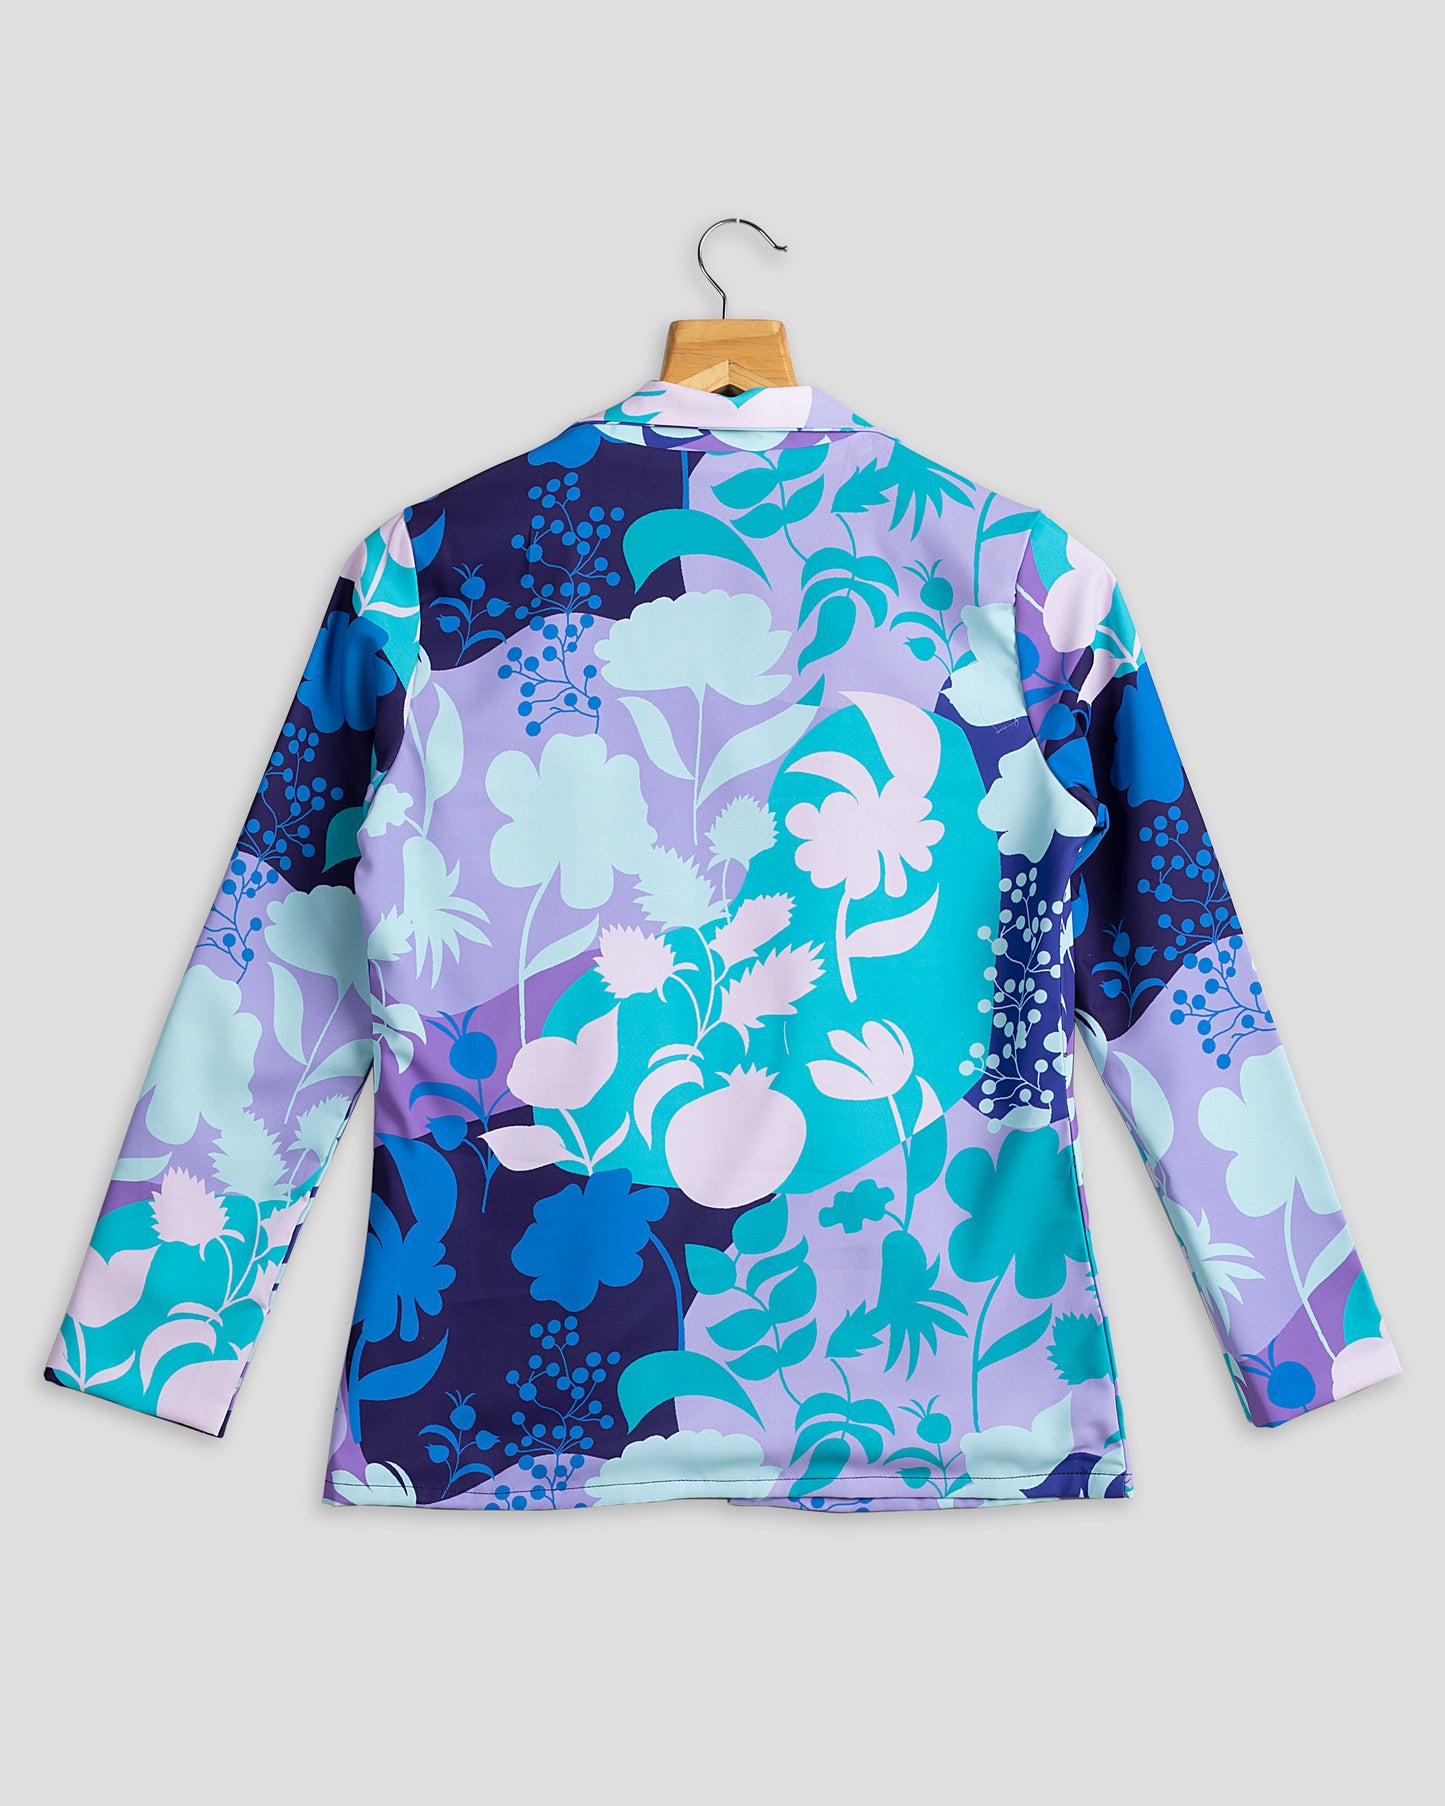 Stunning Floral Jacket For Women